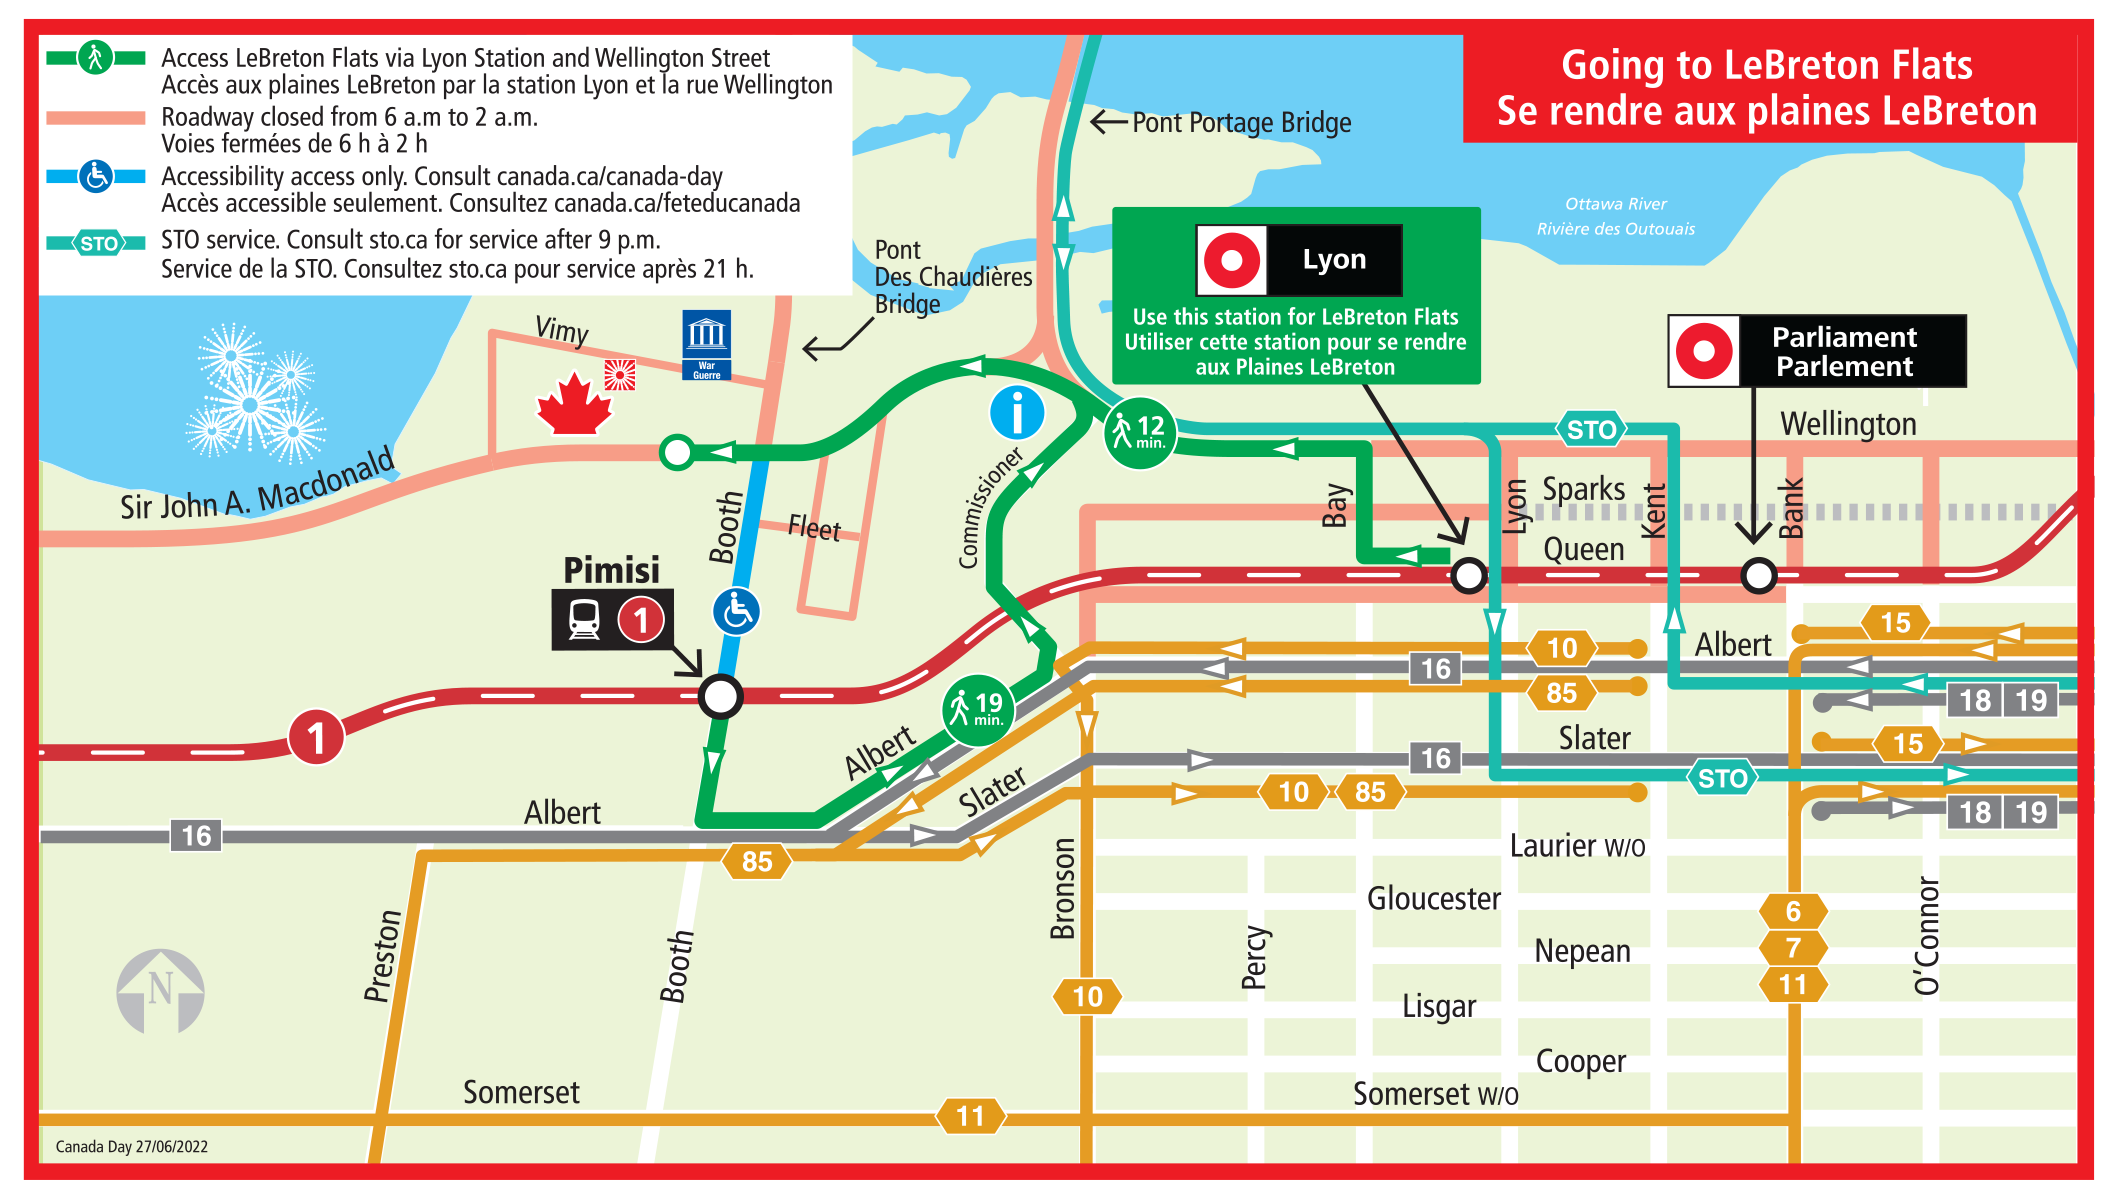 Map for going to LeBreton Flats.